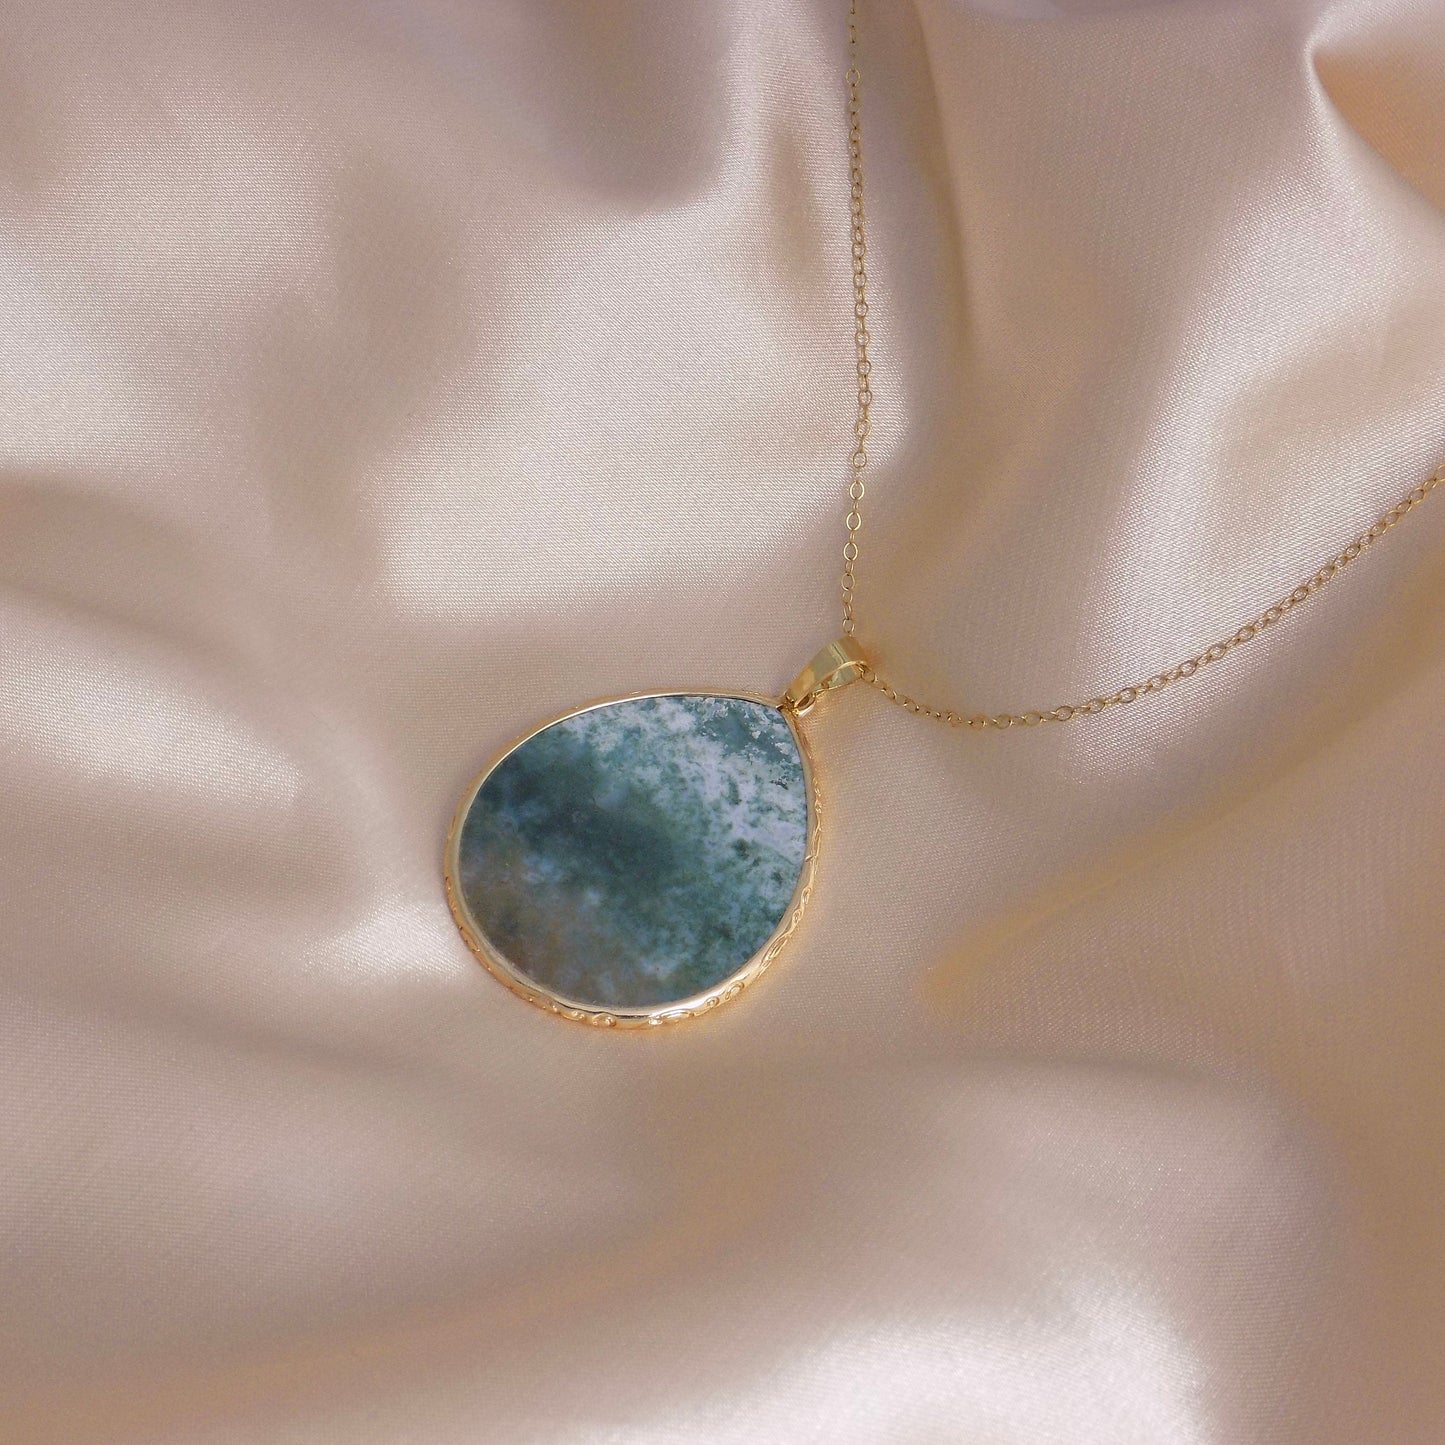 Green Moss Agate Necklace Gold, Large Green Crystal Pendant, Unique Gifts For Women, M6-761